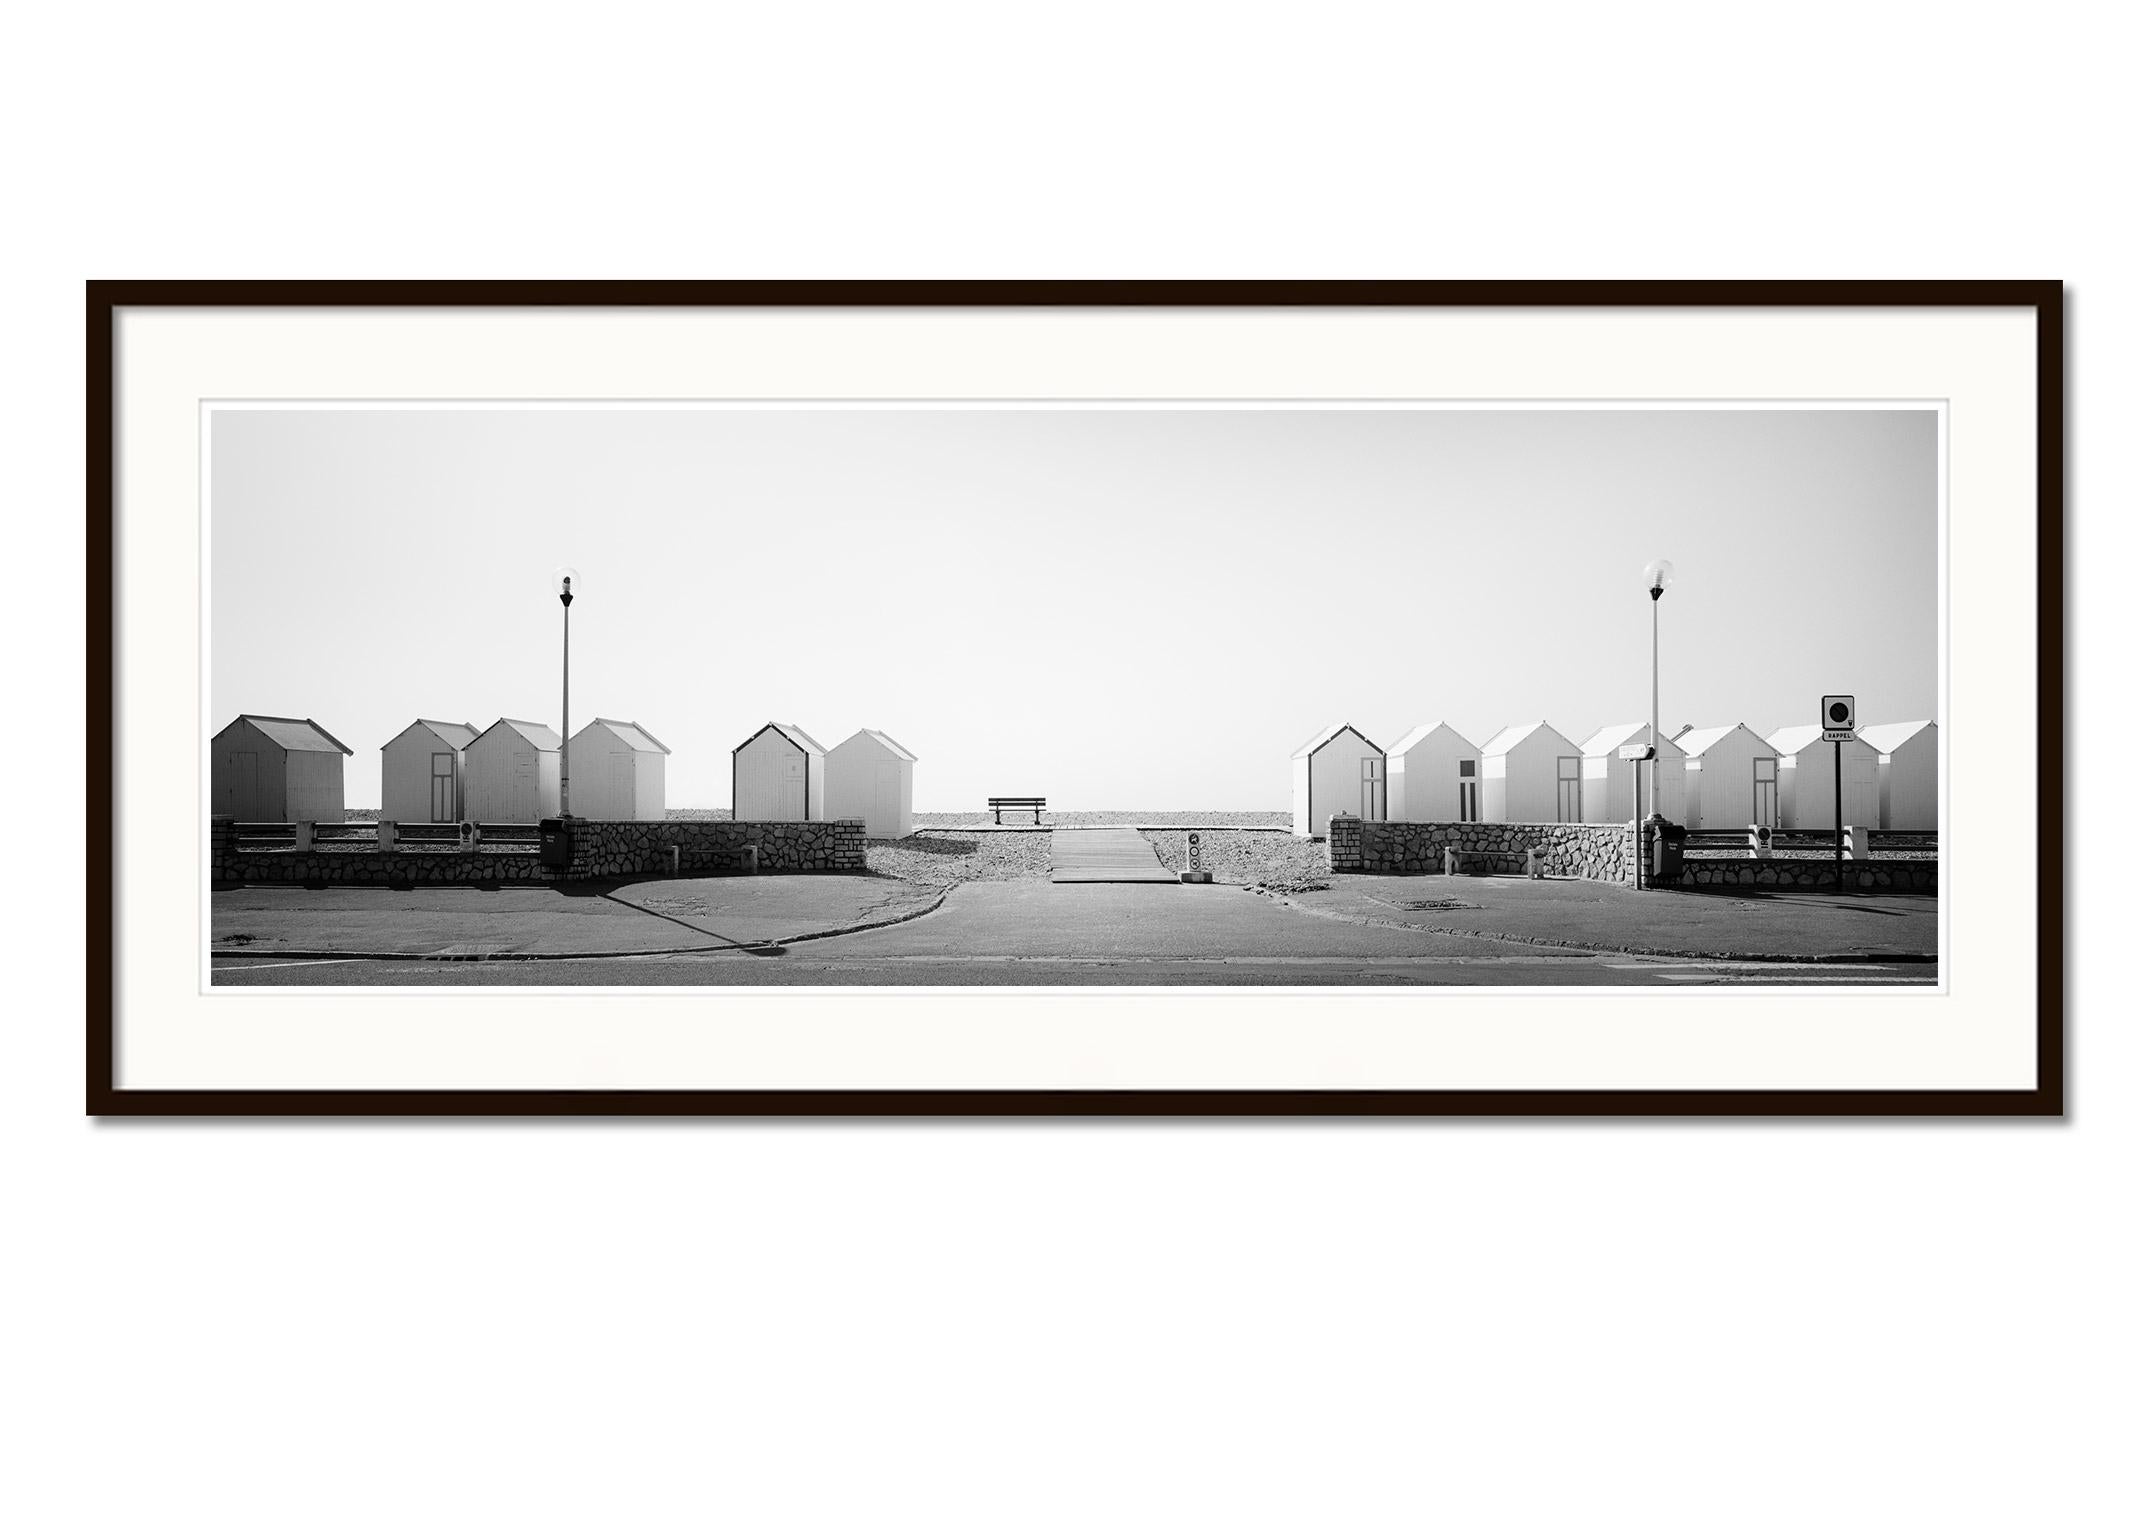 Beach Huts Panorama Cayeux-sur-Mer France black white landscape art photography - Gray Landscape Photograph by Gerald Berghammer